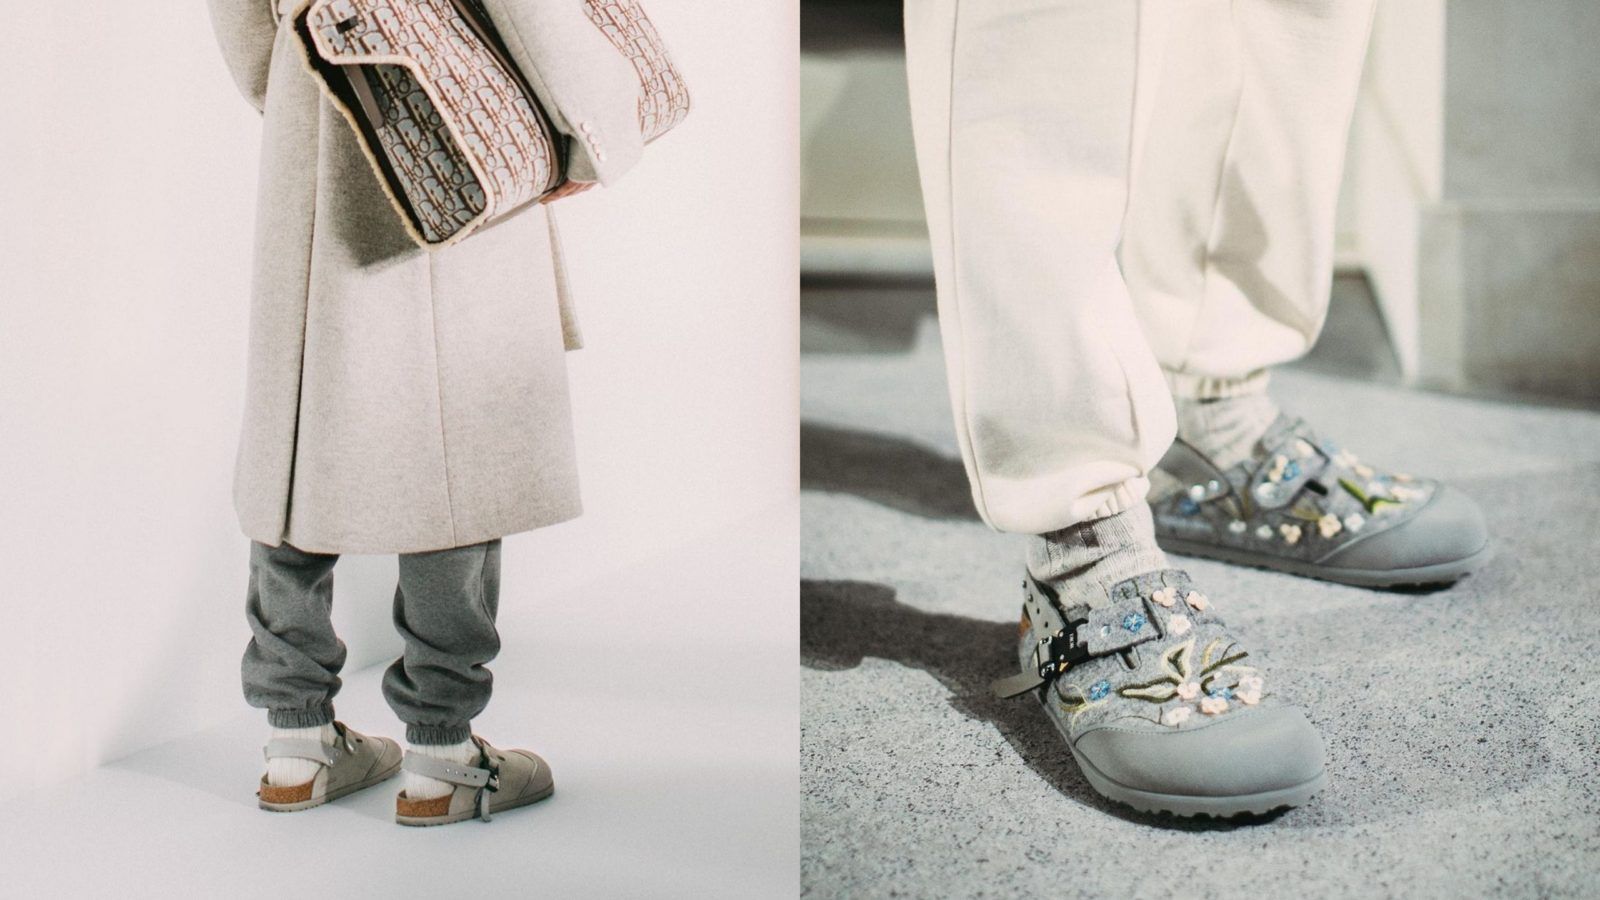 Dior x Birkenstock: The Inspiring Story Behind the Collaboration